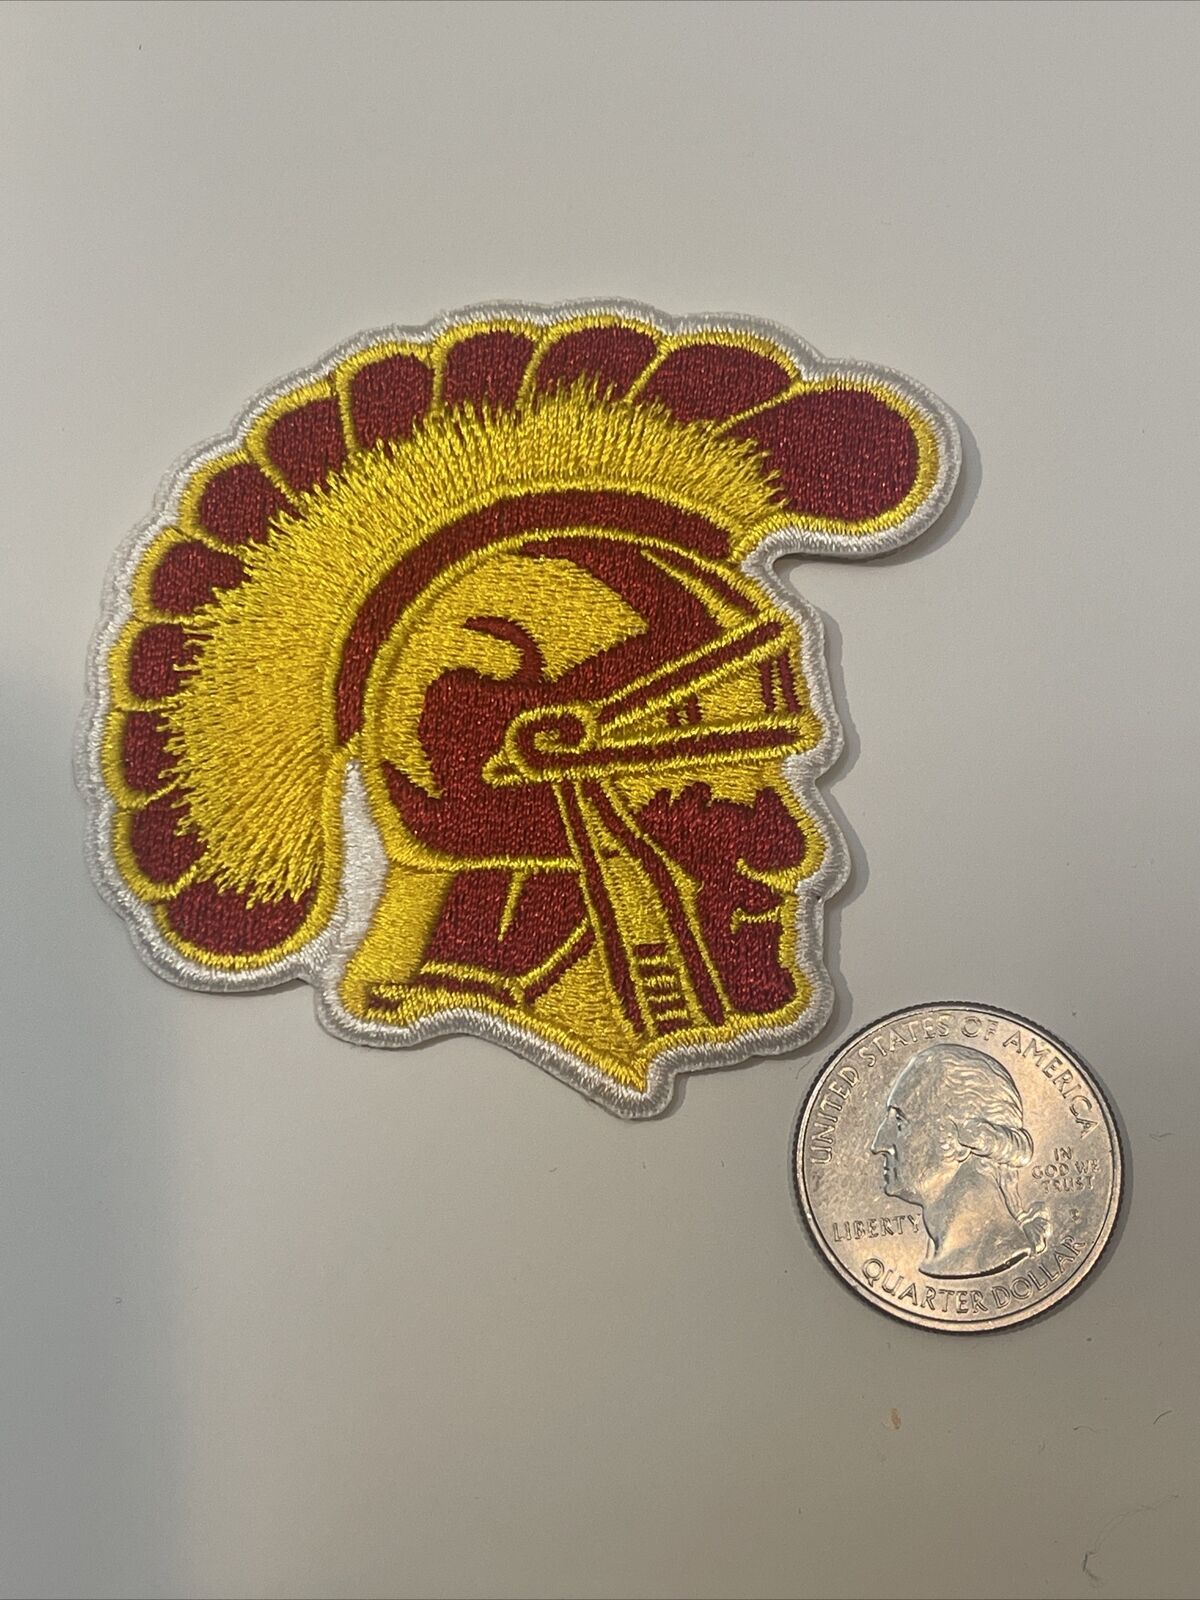 USC SOUTHERN CAL TROJANS Vintage Embroidered Iron On Patch  2.5” X 2.5”